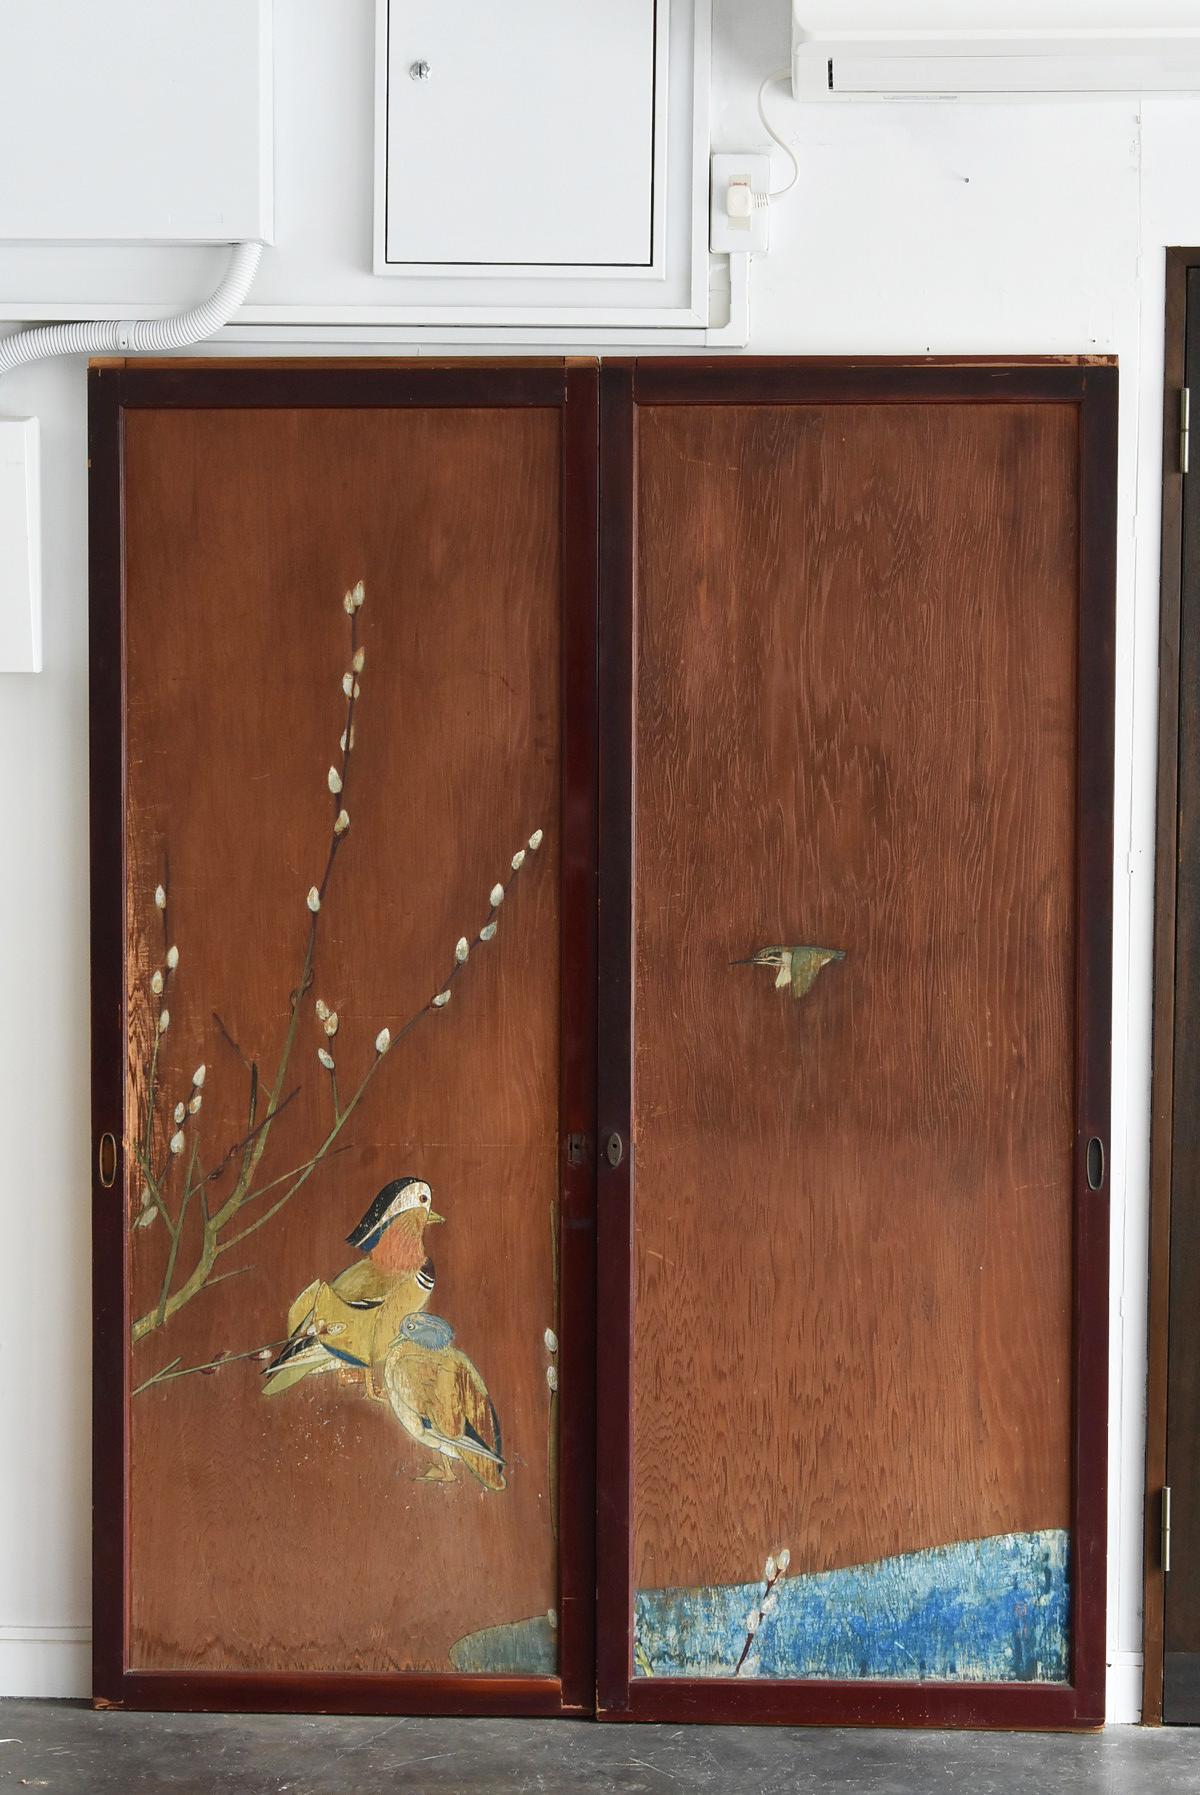 It is a sliding door made in Japan from the Taisho era to the early Showa period (1912-1940).
This is a white plum, a mandarin duck, and a kingfisher.
Mandarin ducks are always drawn as a set of male and female.
It expresses the goodness of the